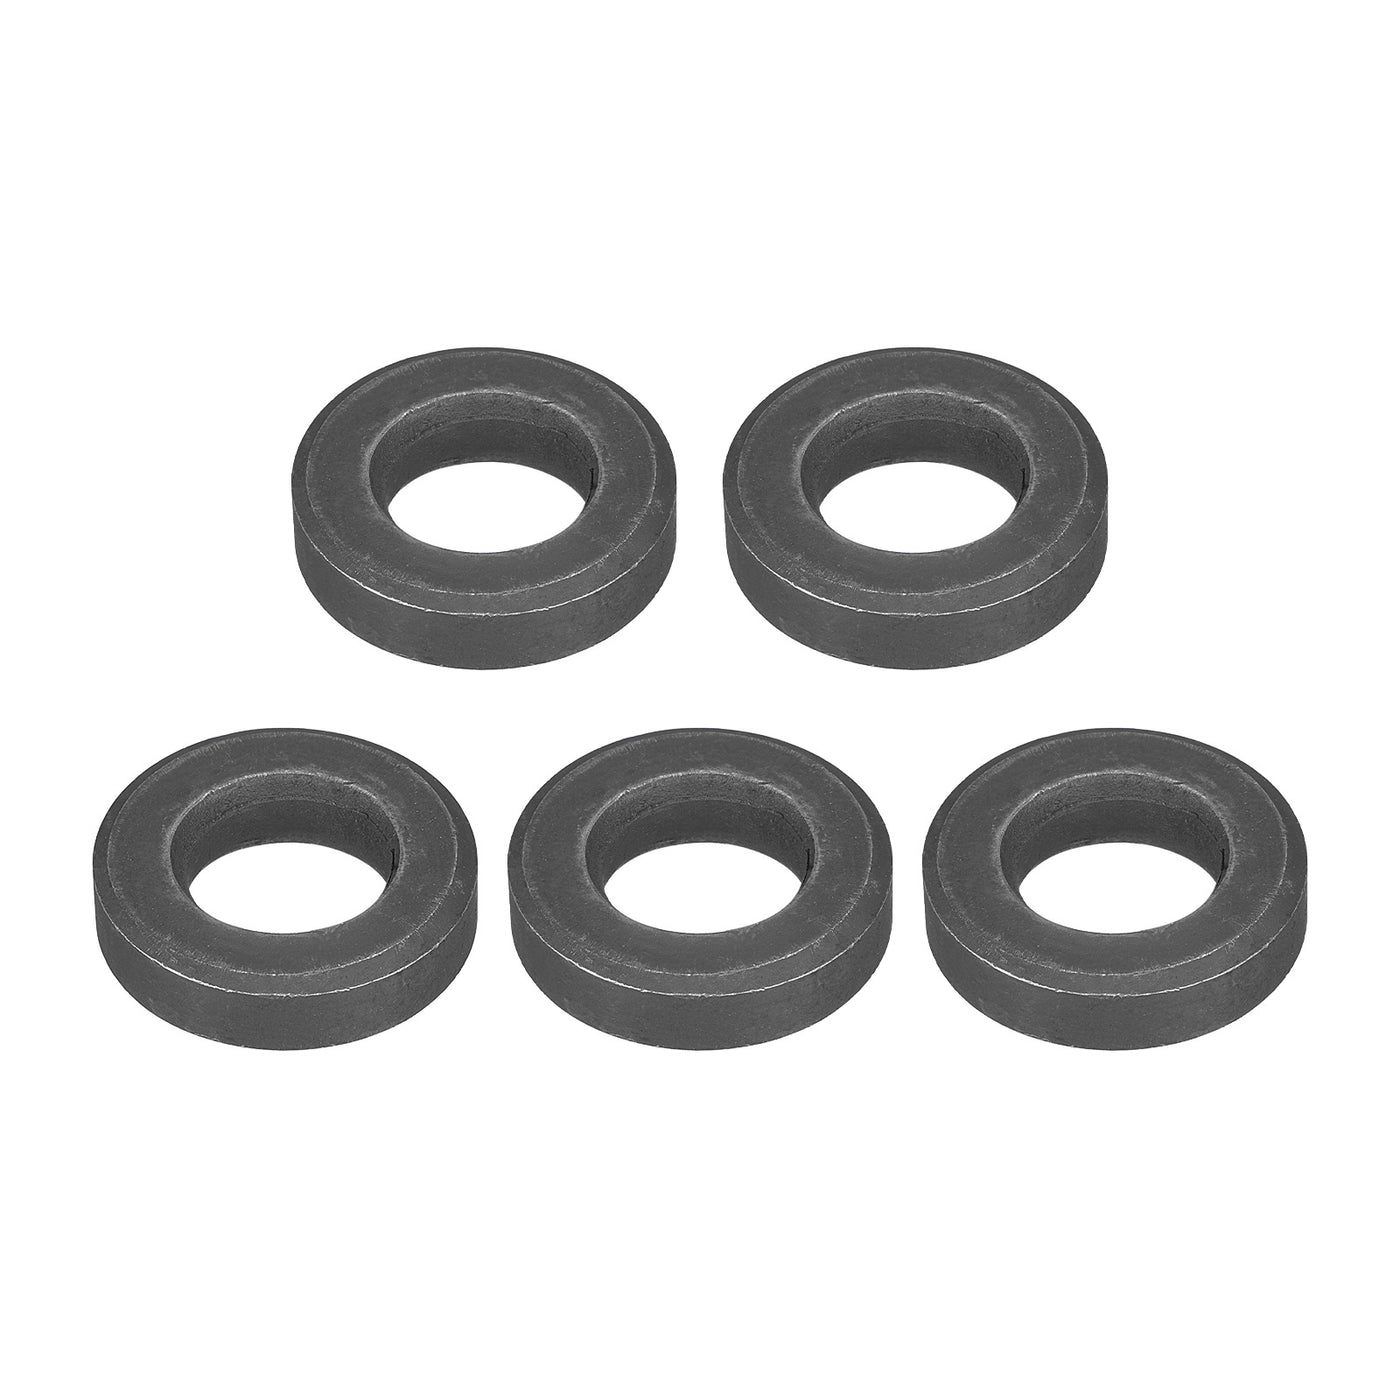 uxcell Uxcell M18 Carbon Steel Flat Washer 5pcs 18.4x35x10mm Grade 8.8 Alloy Steel Fasteners